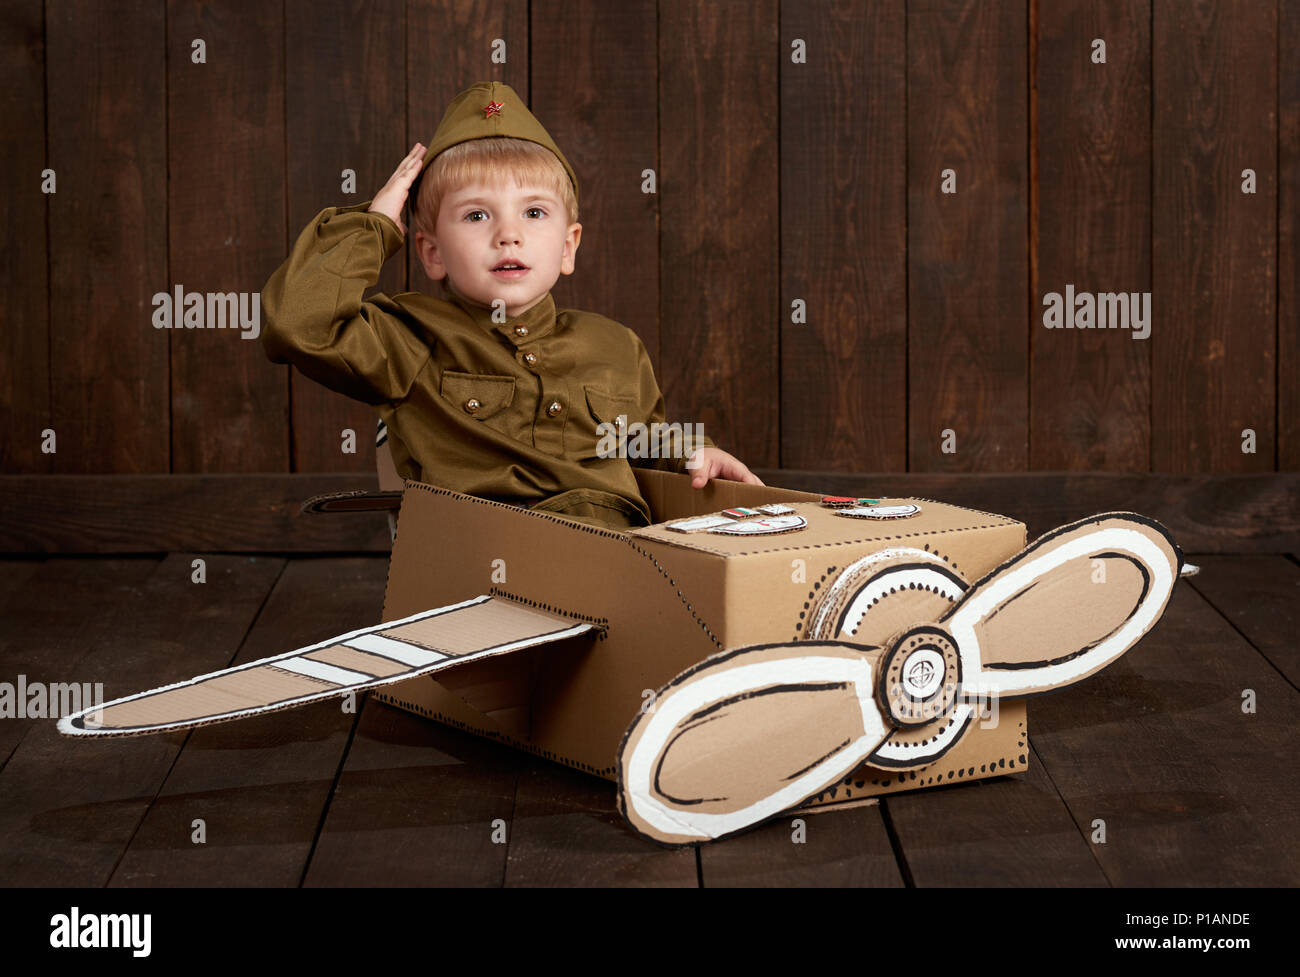 children boy are dressed as soldier in retro military uniforms sit in an airplane made of cardboard box and dreams of becoming a pilot, dark wood back Stock Photo